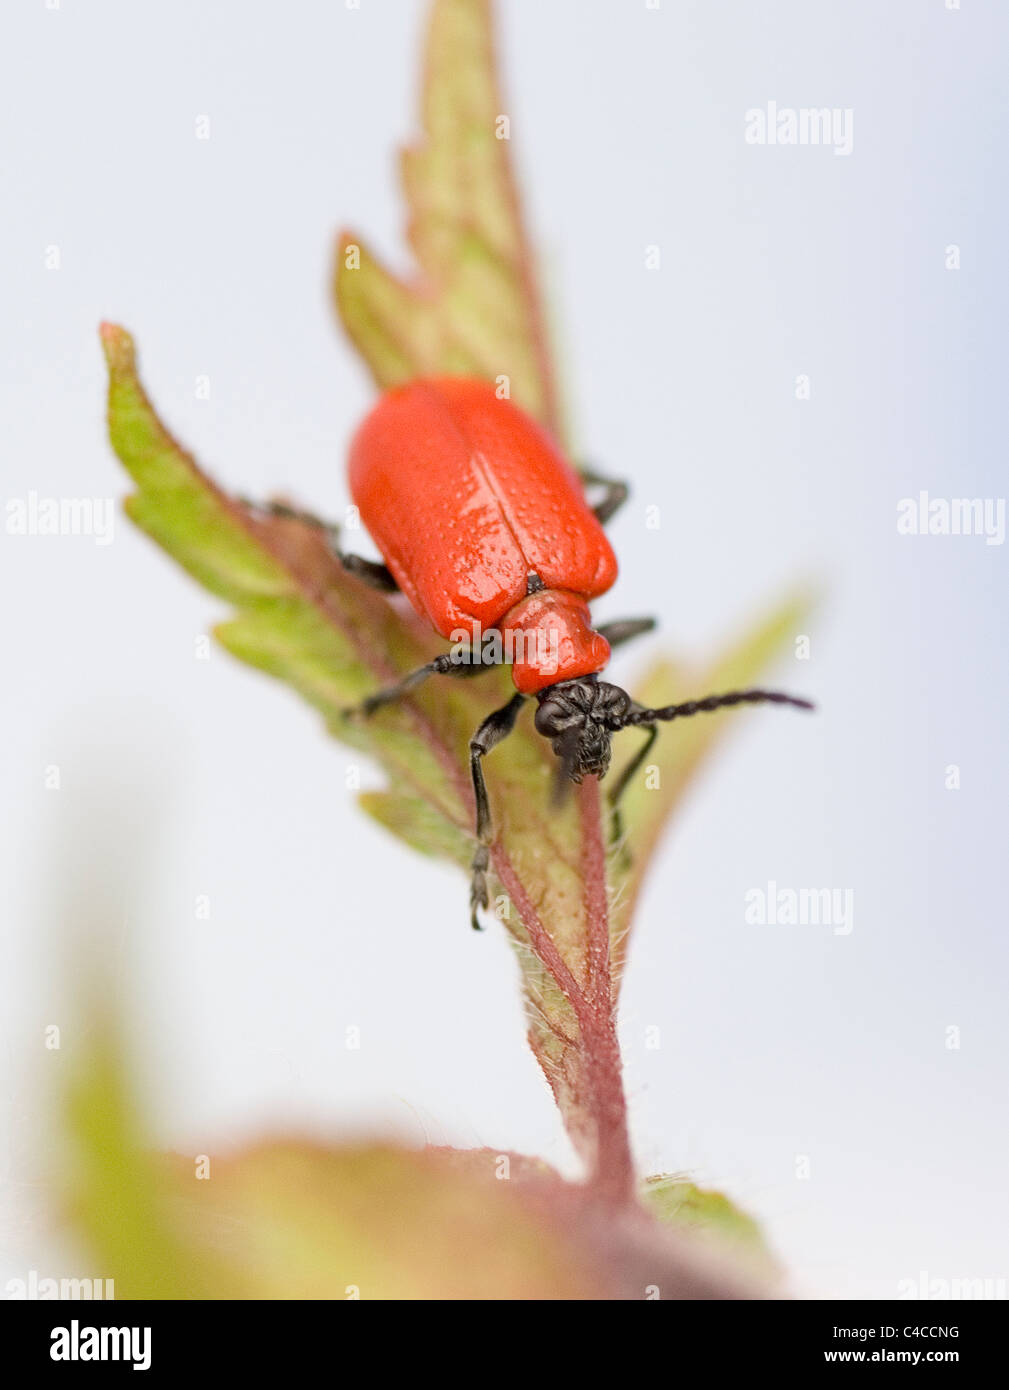 Red lily beetle Stock Photo